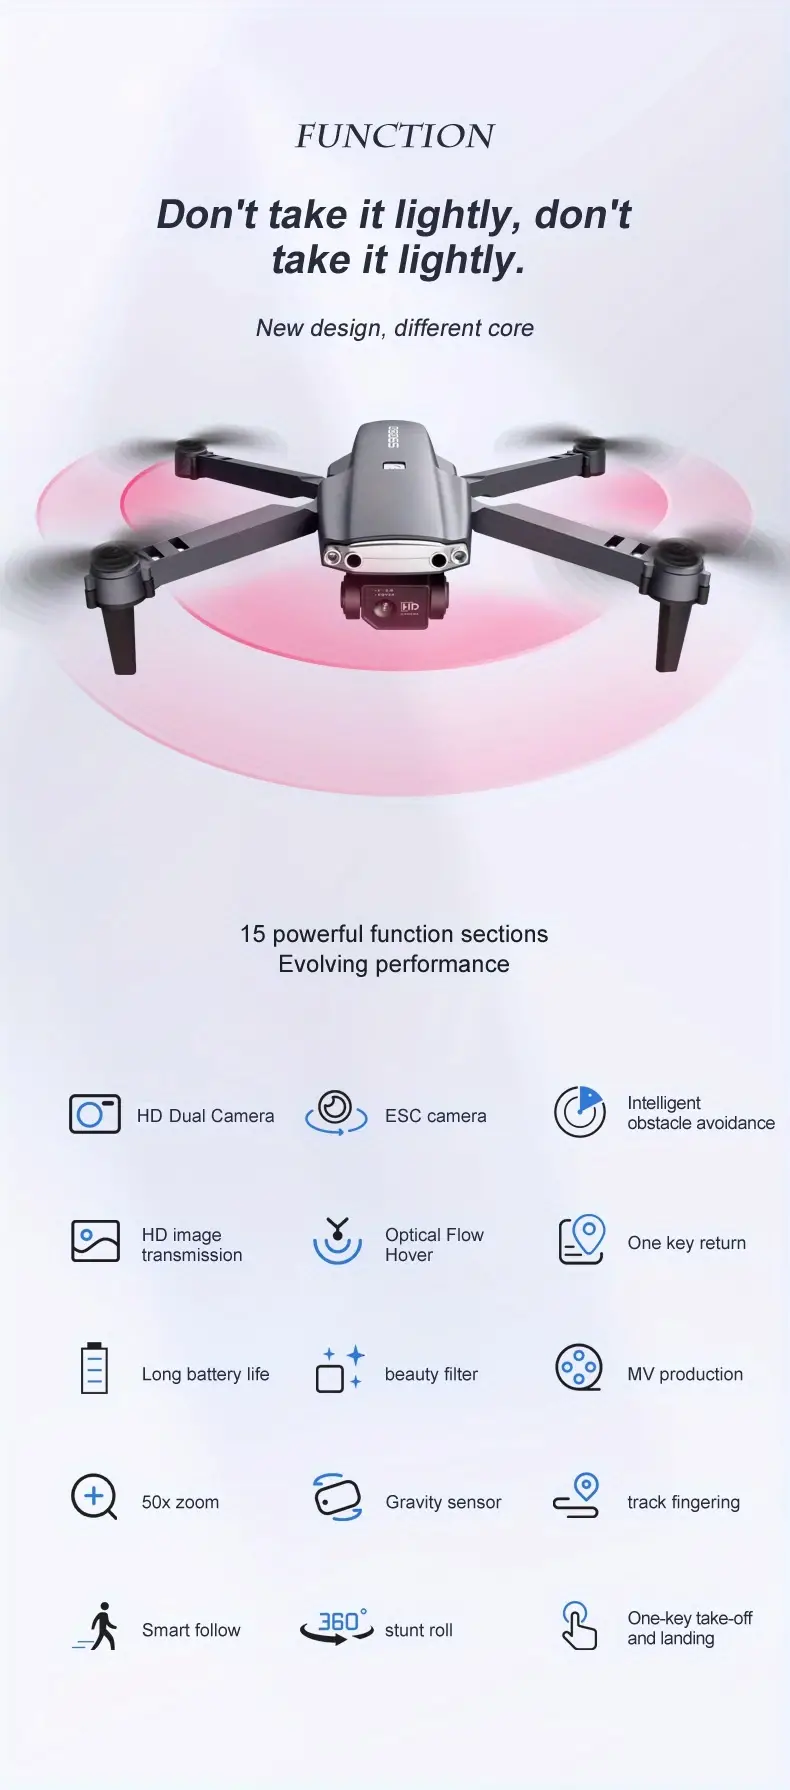 s9000 large size folding drone dual camera hd aerial camera esc camera obstacle avoidance remote control aircraft details 2